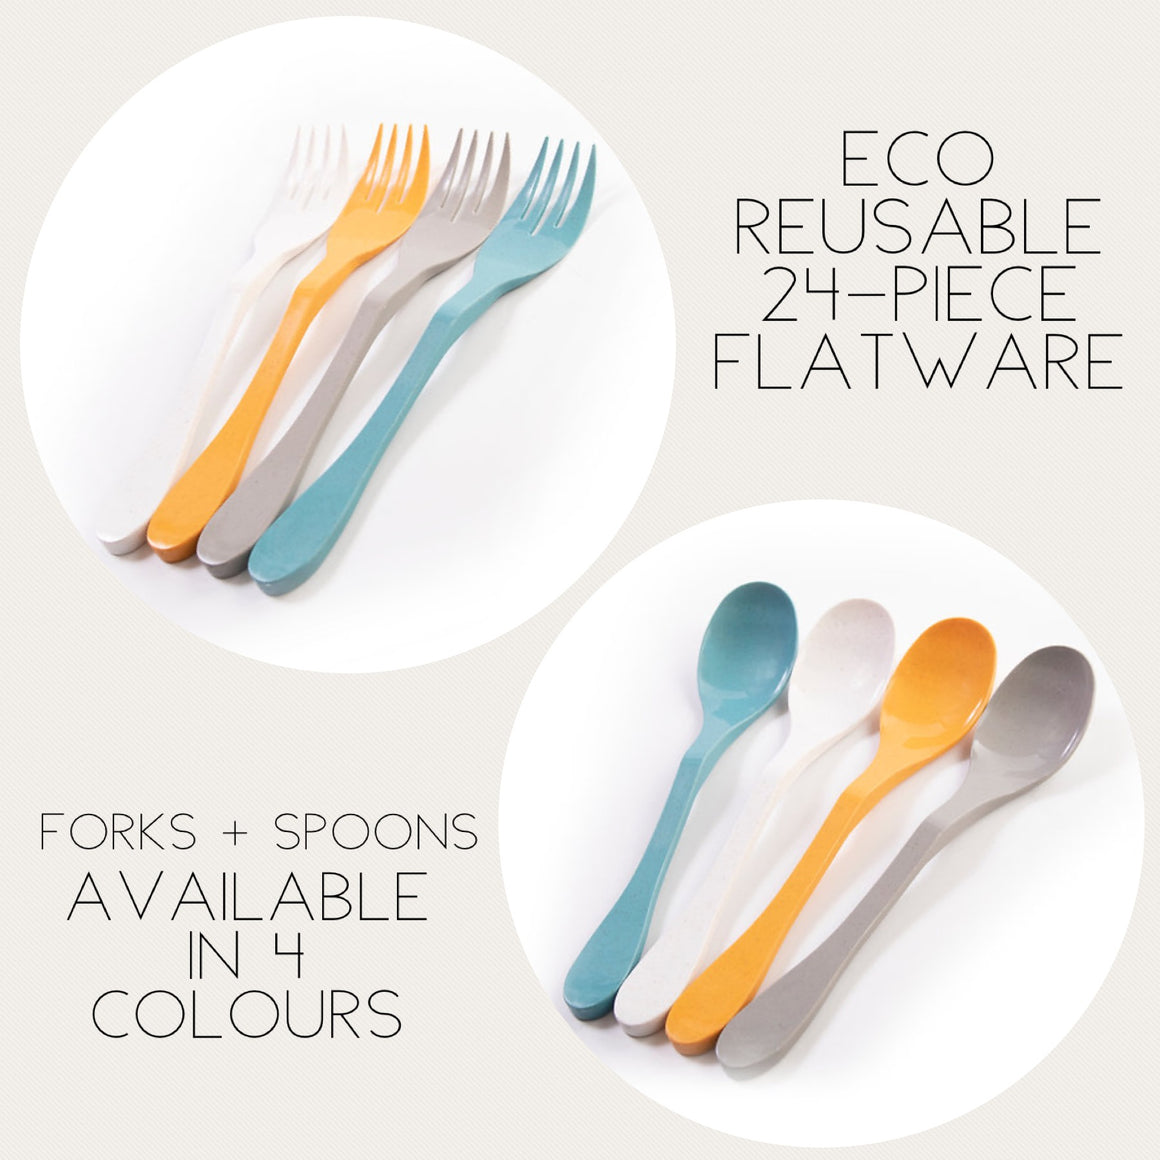 PREMIUM ECO FLATWARE - REUSABLE FORKS + SPOONS (Pack of 24)